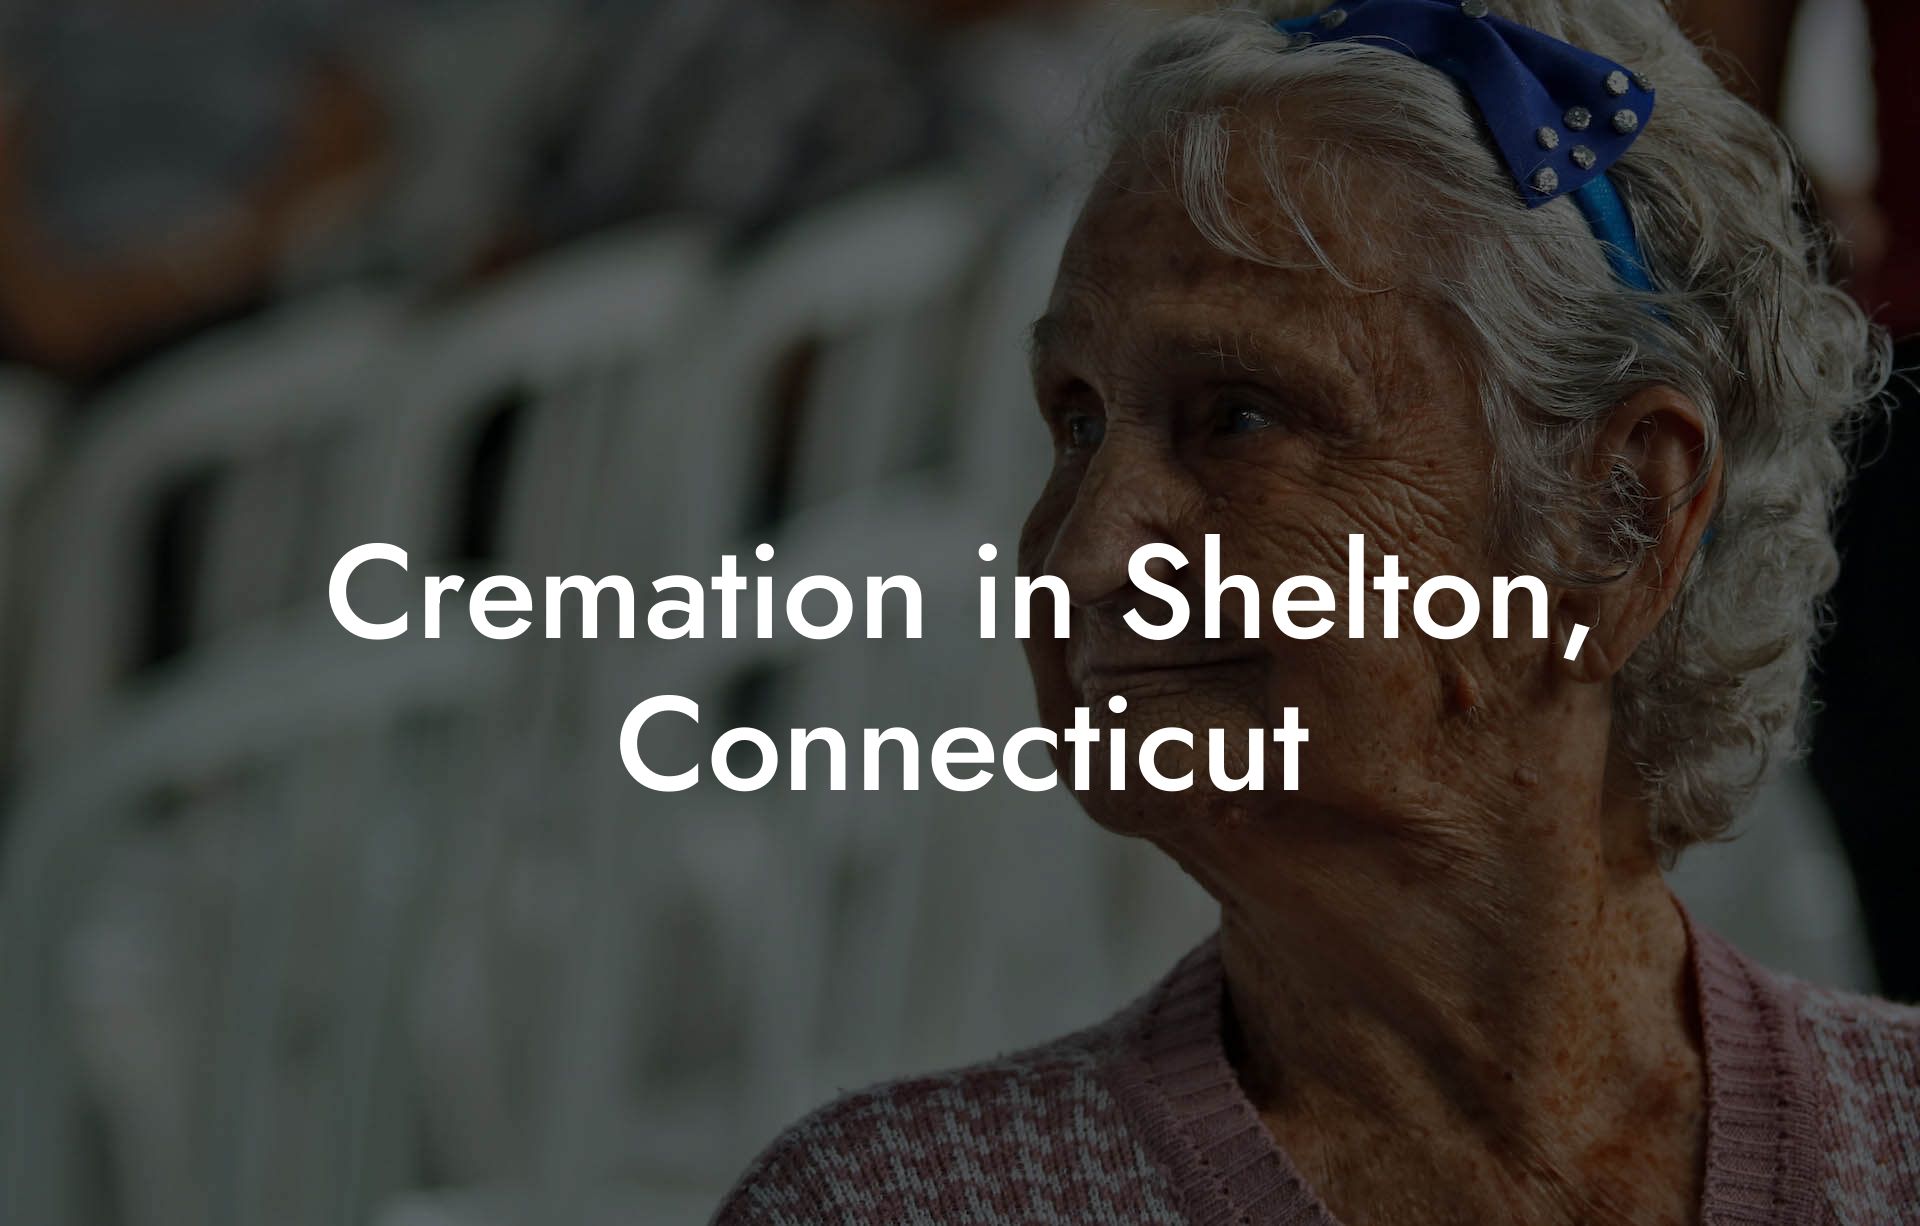 Cremation in Shelton, Connecticut